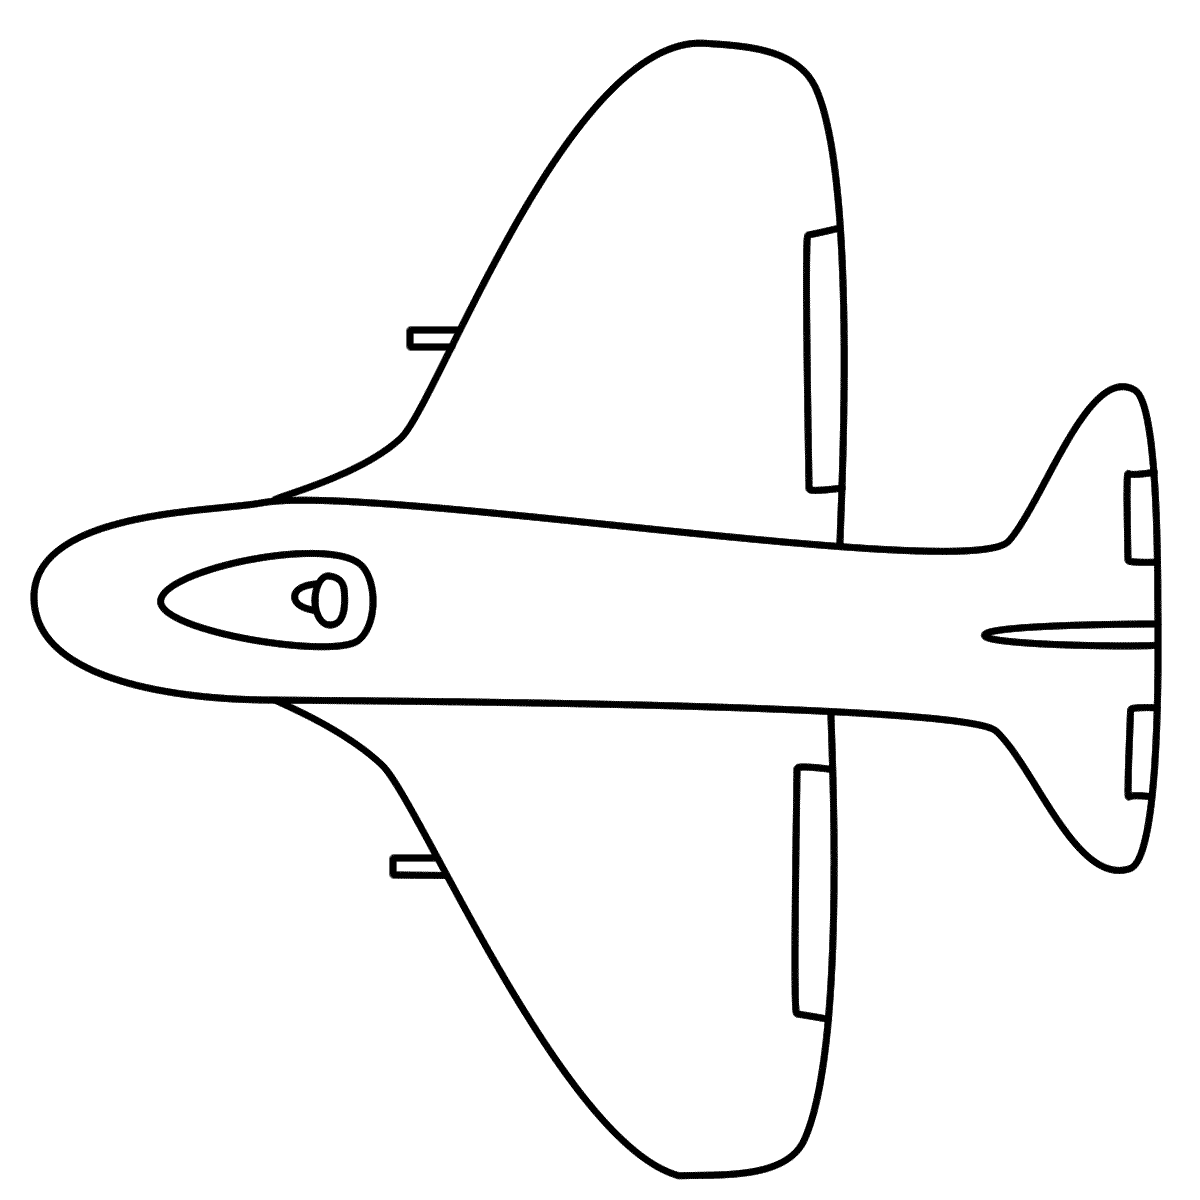 Airplane coloring pages for kids - Coloring Pages & Pictures - IMAGIXS